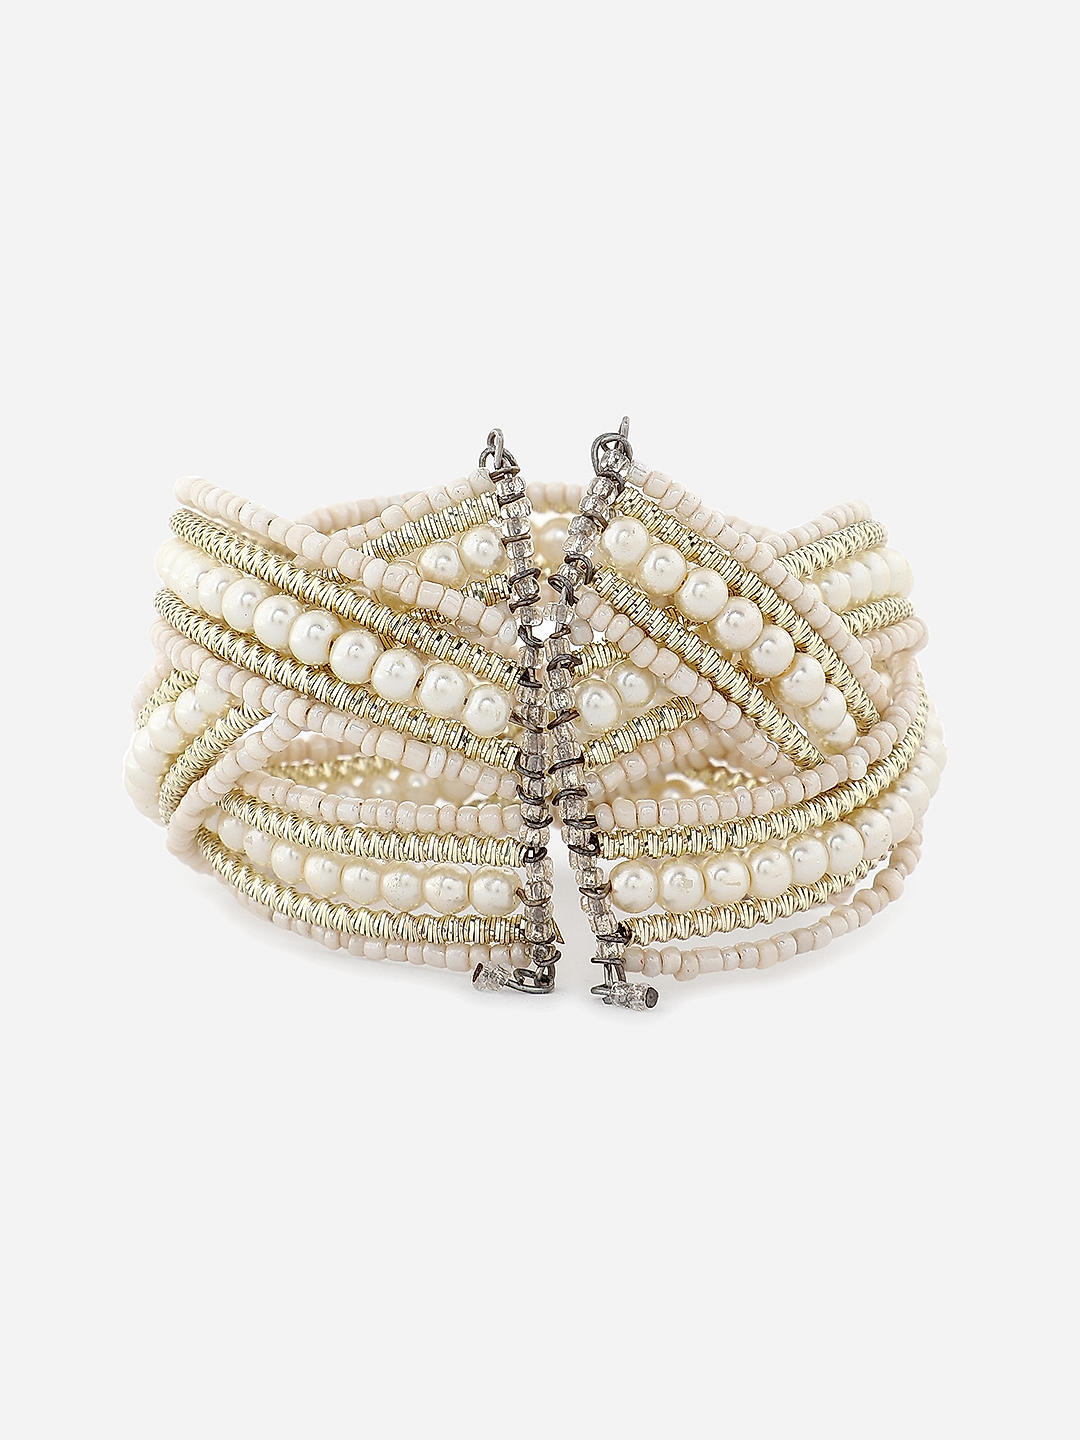 Bracelet | Sterling Silver Just the Beads (singles) - The Callaway  Collection